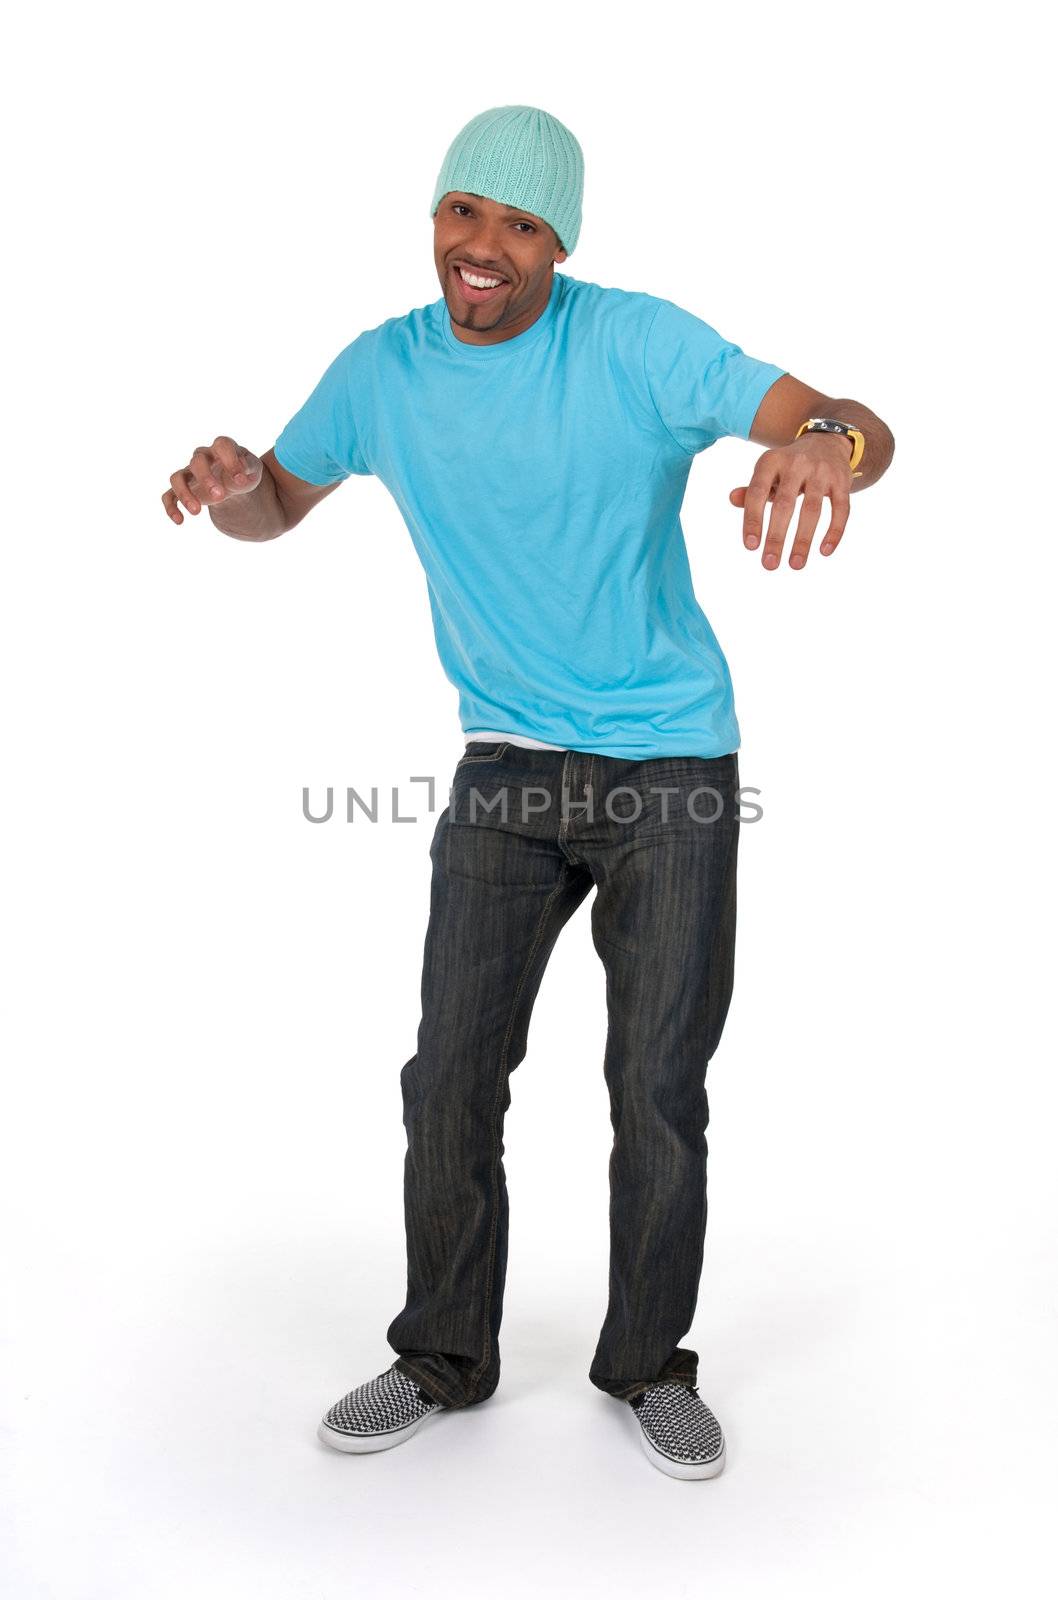 Funny guy in a blue t-shirt dancing by anikasalsera